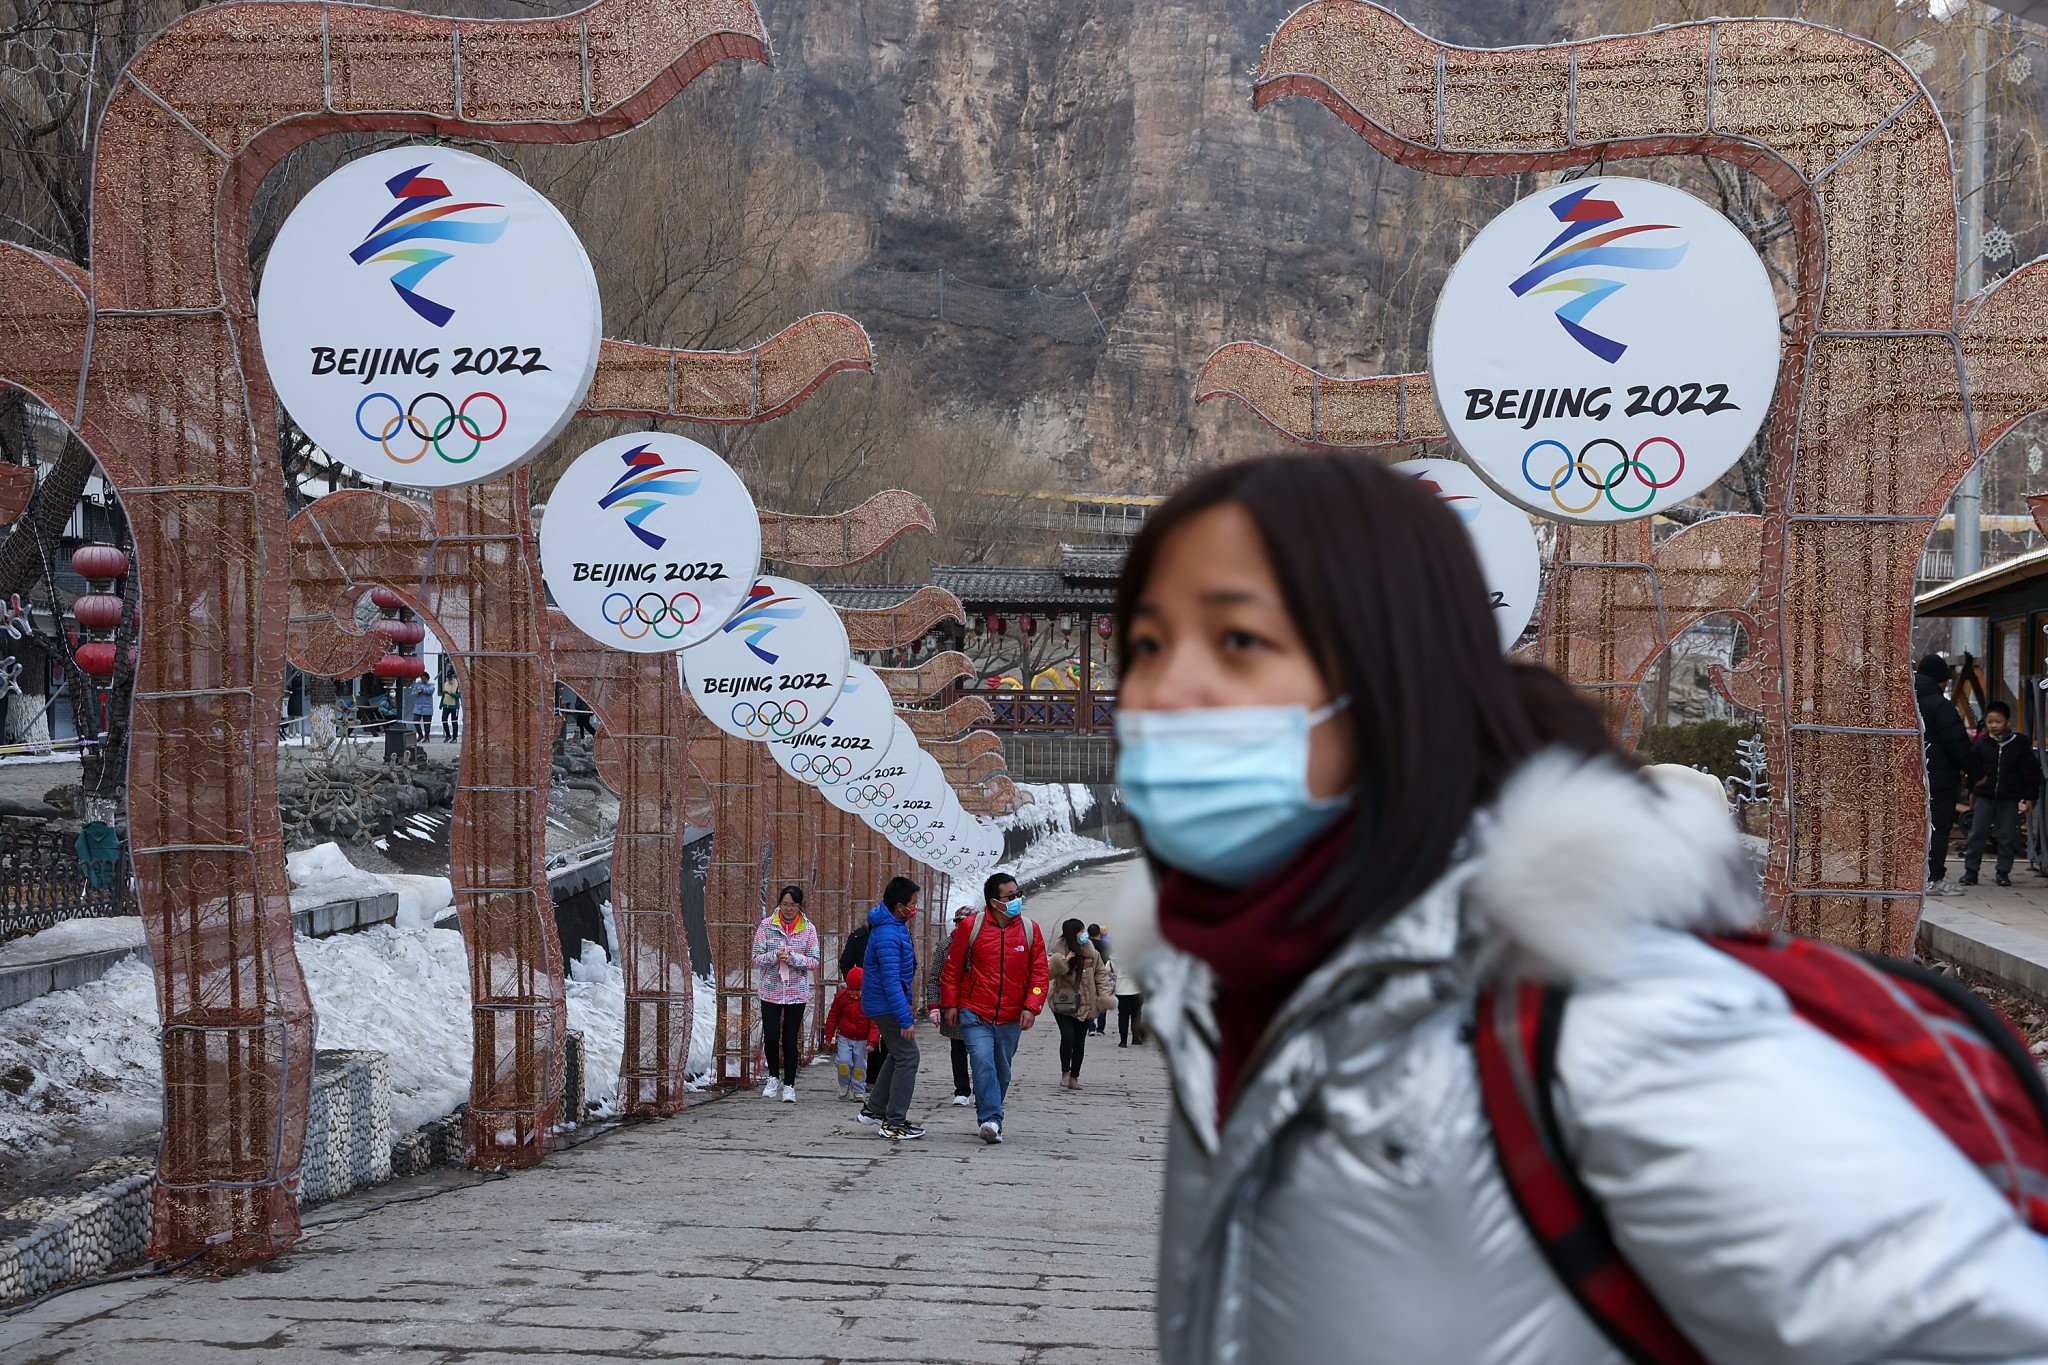 It is claimed that those who breach Beijing 2022's intellectual property rights will be 